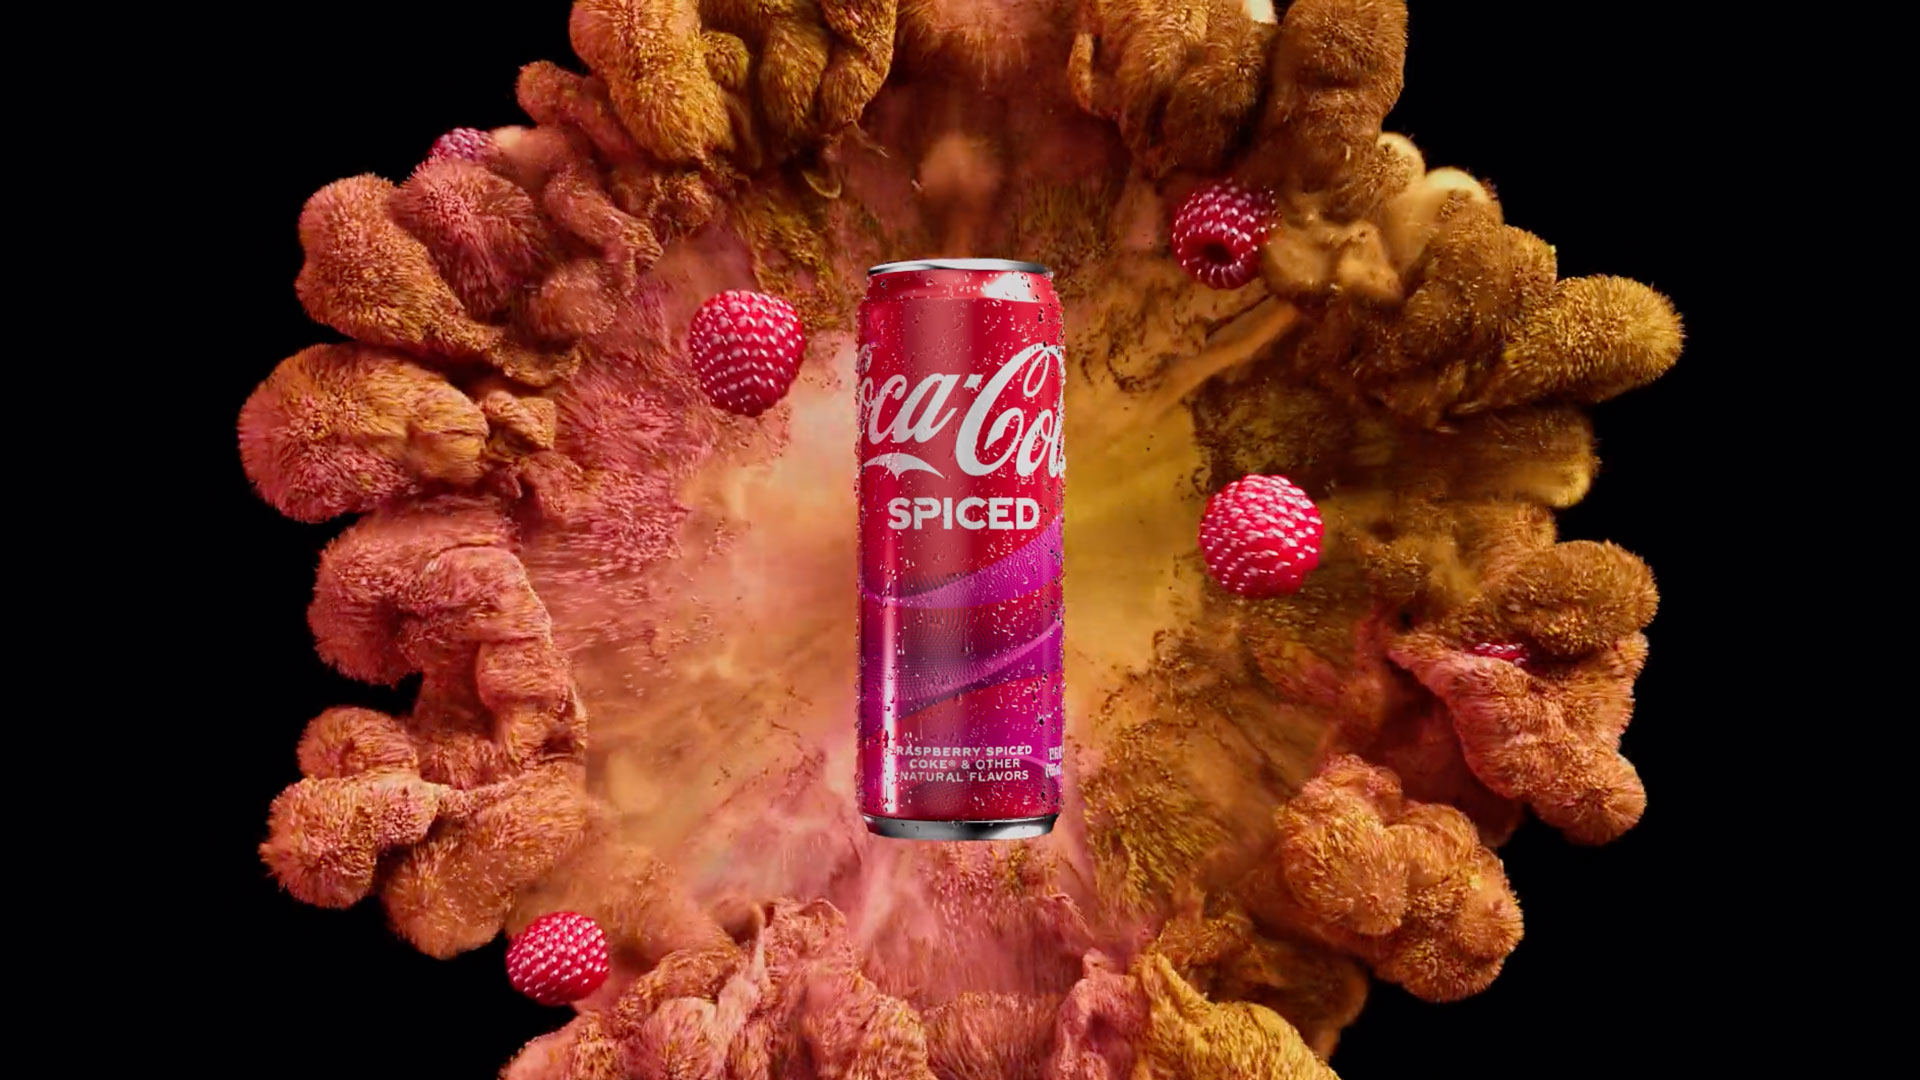 MAMMAL and Momemtum Launch Coke Spiced IRL in NYC - Motion design [Video]